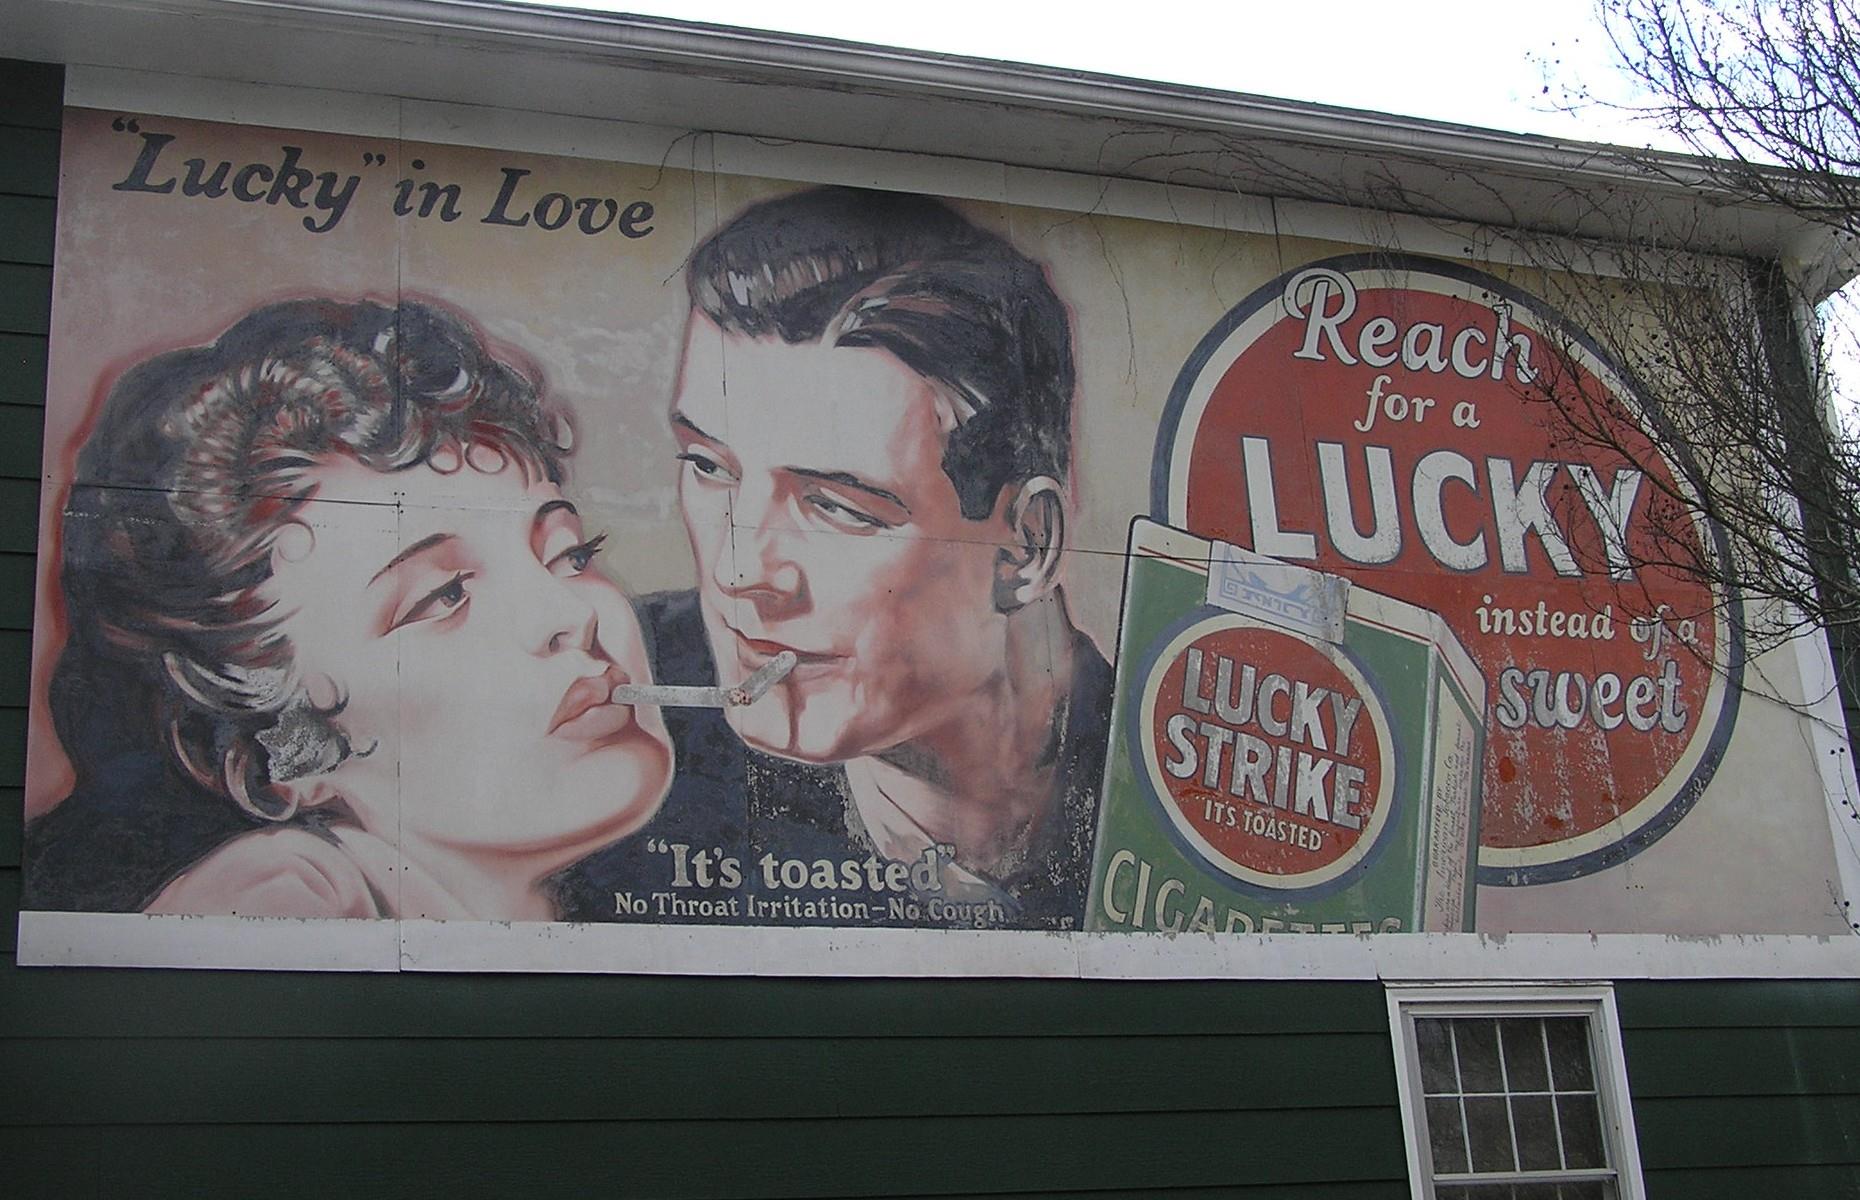 <p>If ever there was a diet that should come with a health warning, it's this. In 1928, American cigarette brand Lucky Strike coined the slogan 'reach for a Lucky instead of a sweet', encouraging people to suppress their hunger pangs by smoking instead. (This photo shows a surviving billboard from the 1930s.) It went on to advise people to 'avoid harmful methods to reduce' and enjoy the delicious toasted flavour of Luckies as 'a delightful alternative to the things that make you fat' instead. Oh, the benefits of hindsight…</p>